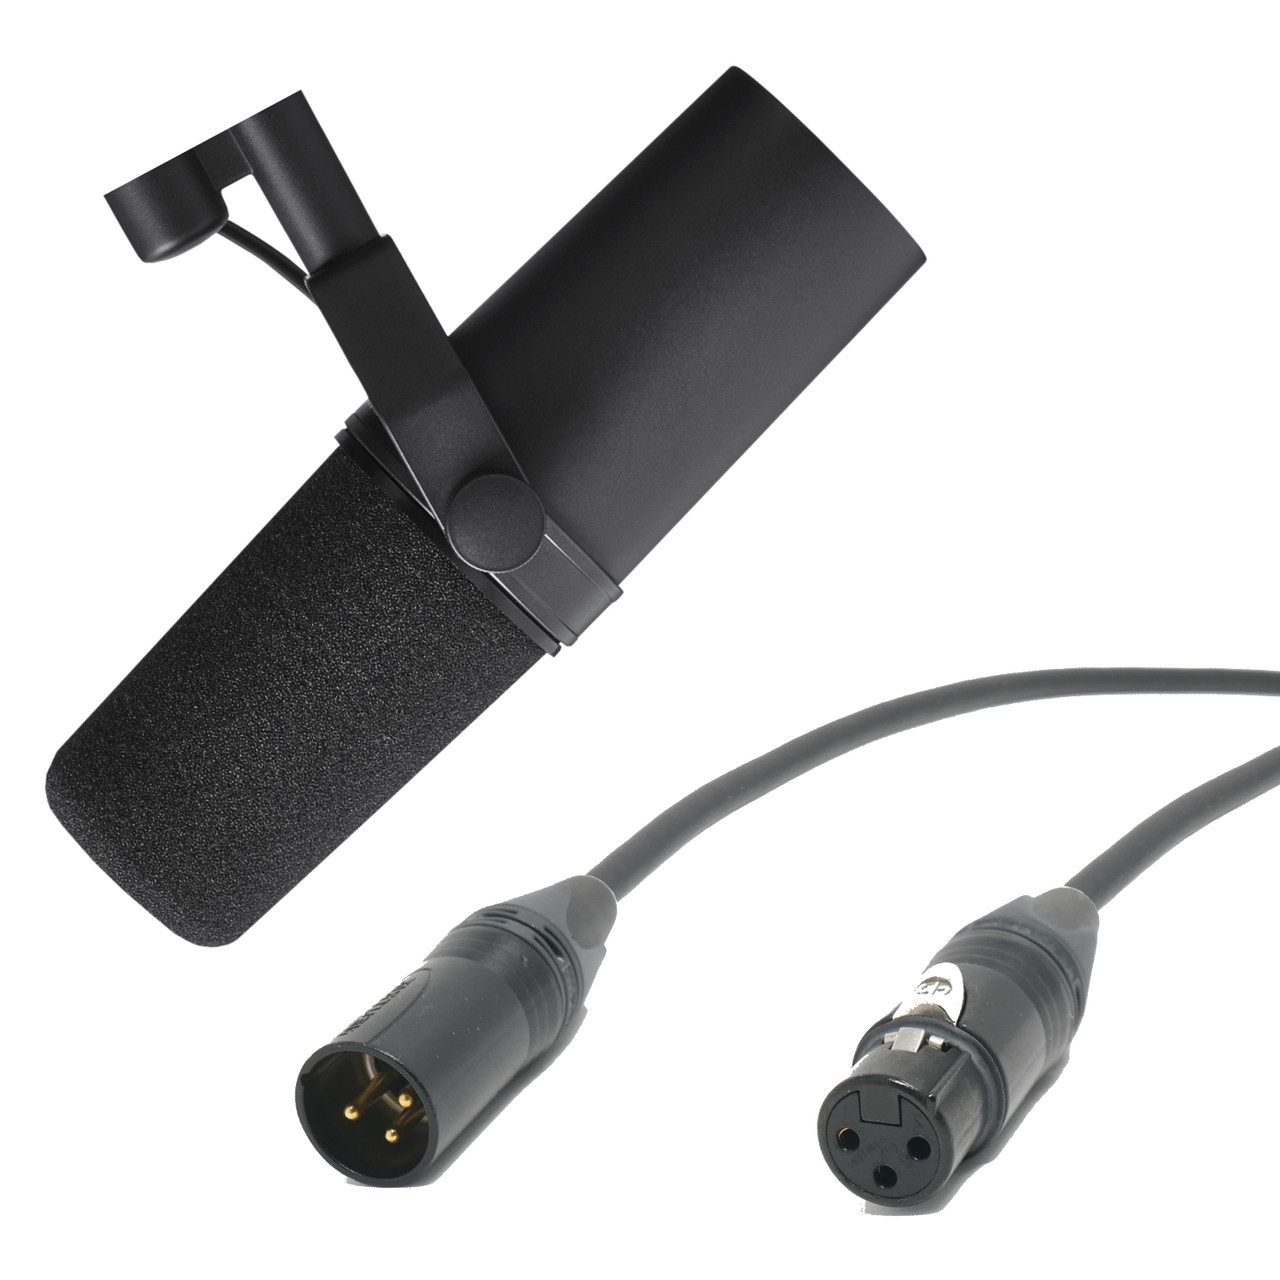 https://cdn11.bigcommerce.com/s-1ipi5w/images/stencil/1280x1280/products/3914/9002/shure-sm7b-active-booster-cable-bundle__09174.1600202950.jpg?c=2